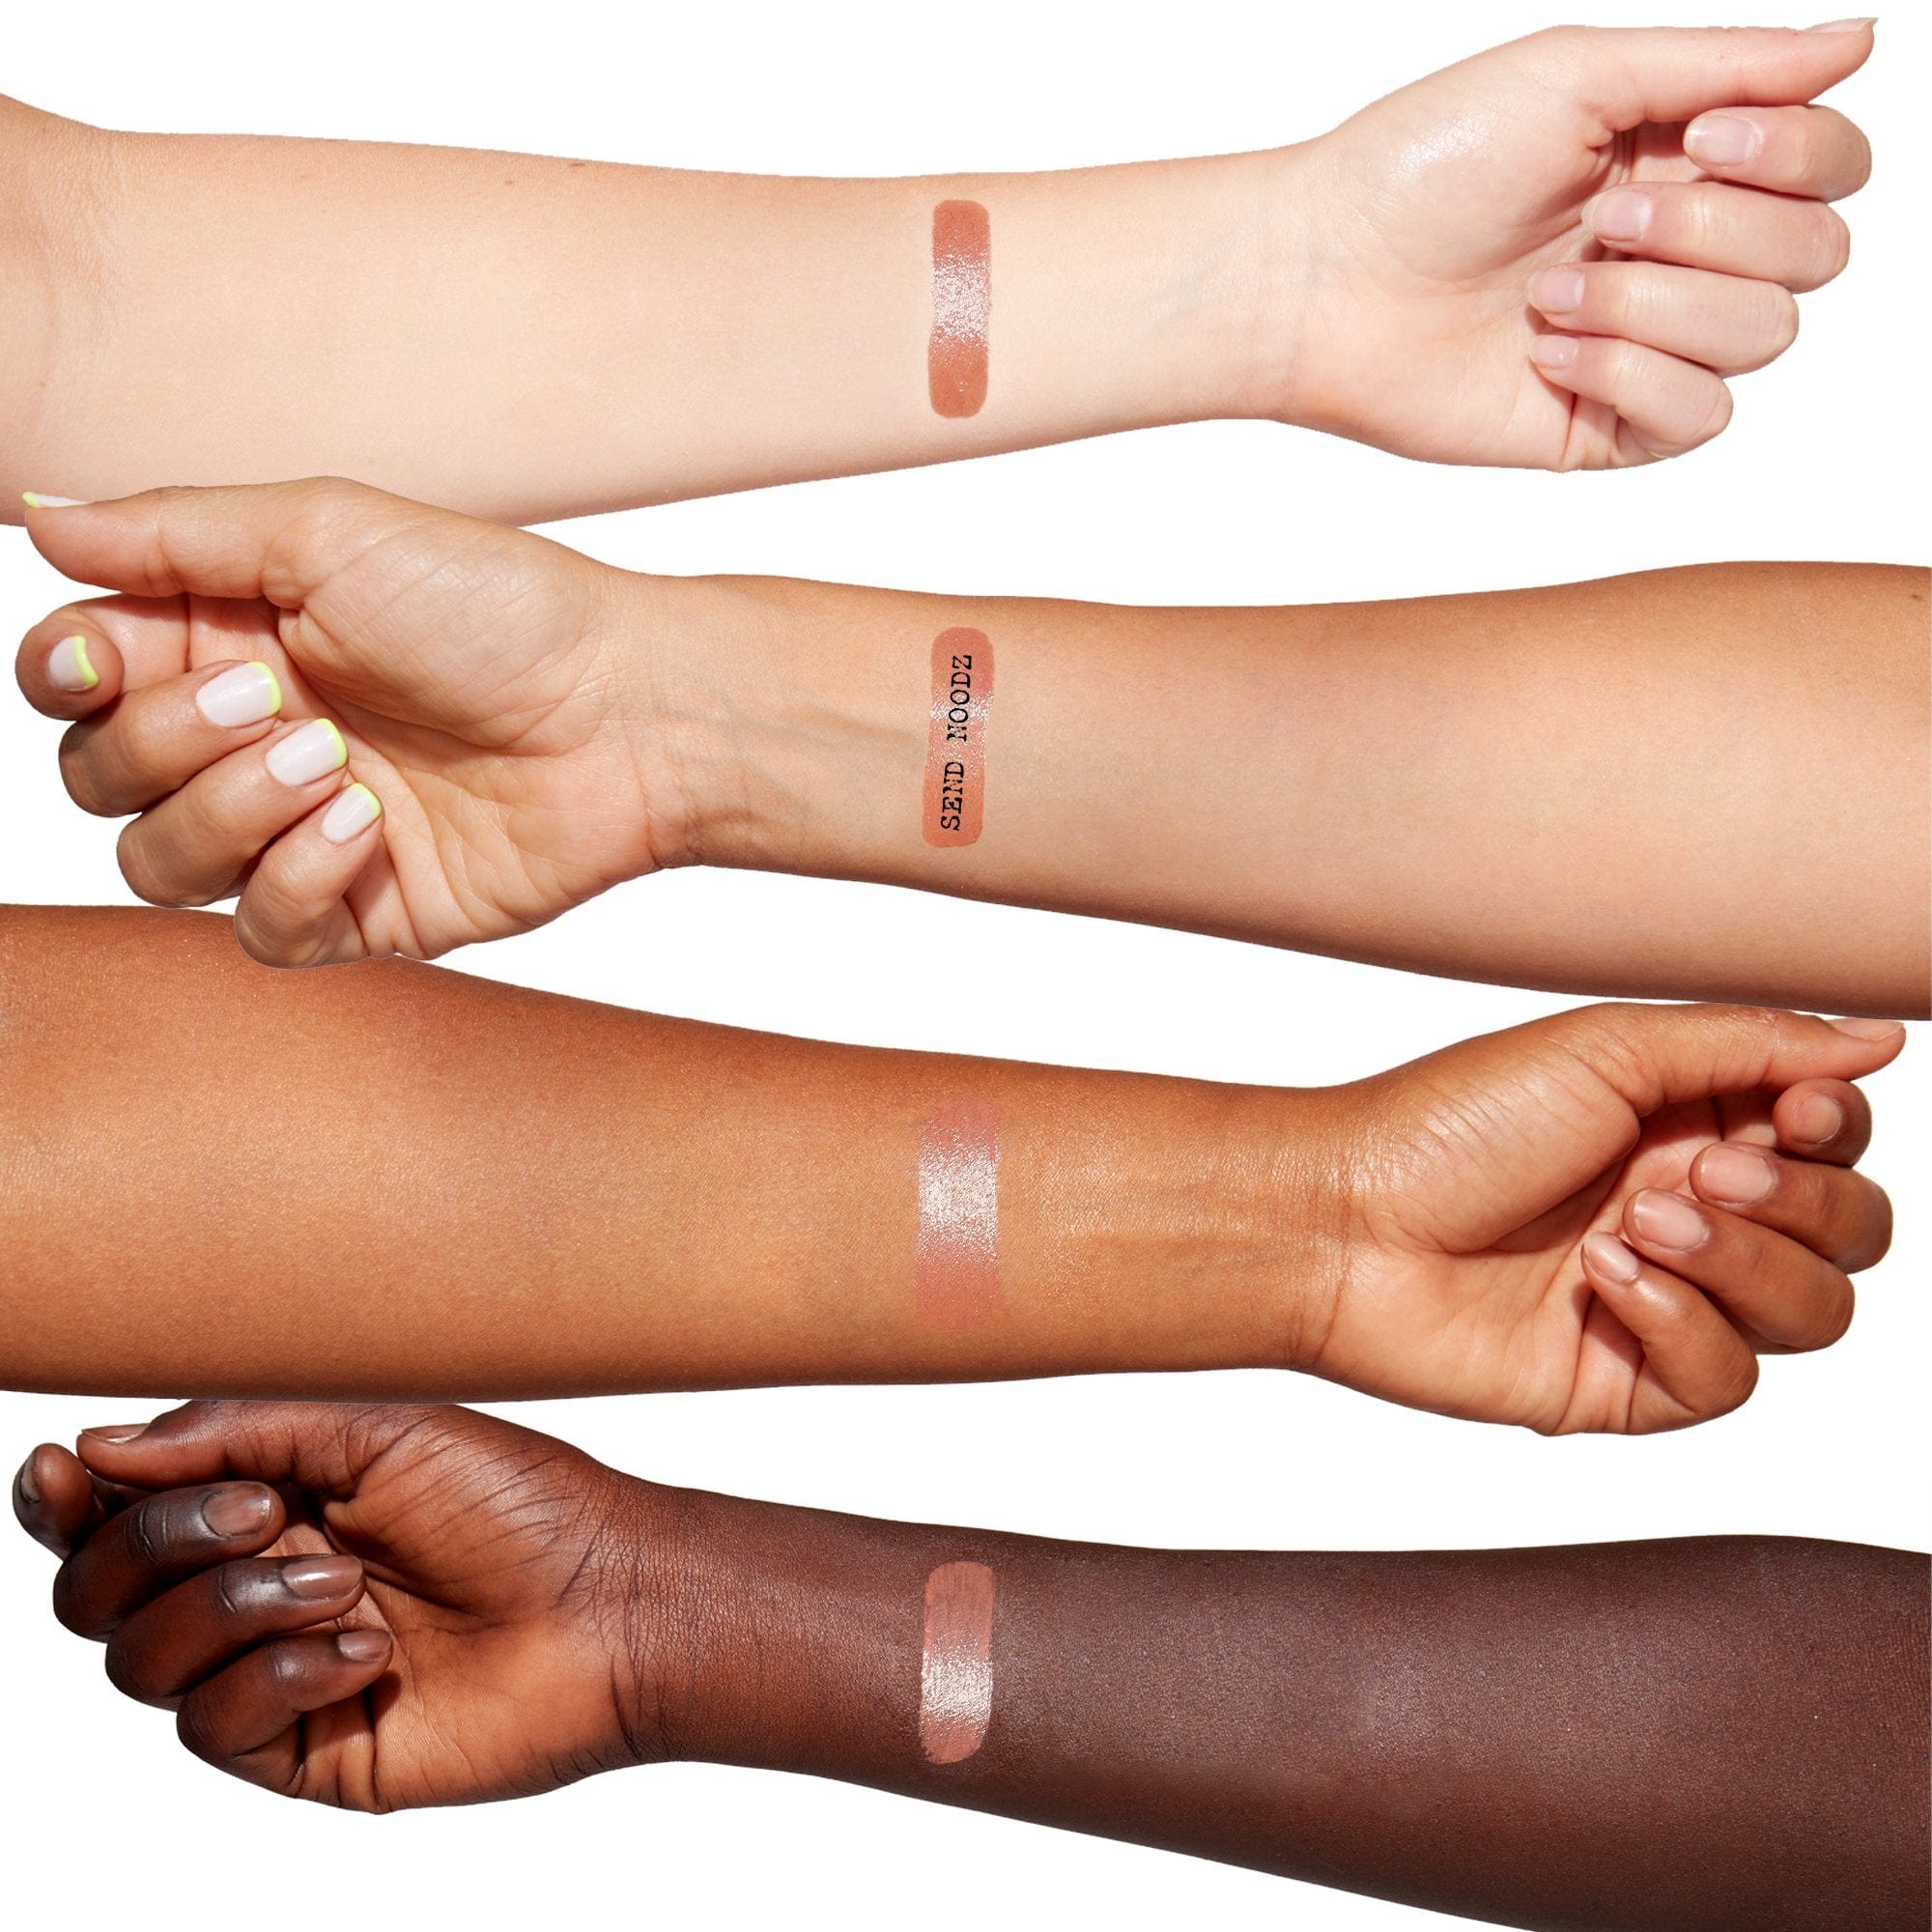 Arms in different skin tones with Send Noodz swatches 